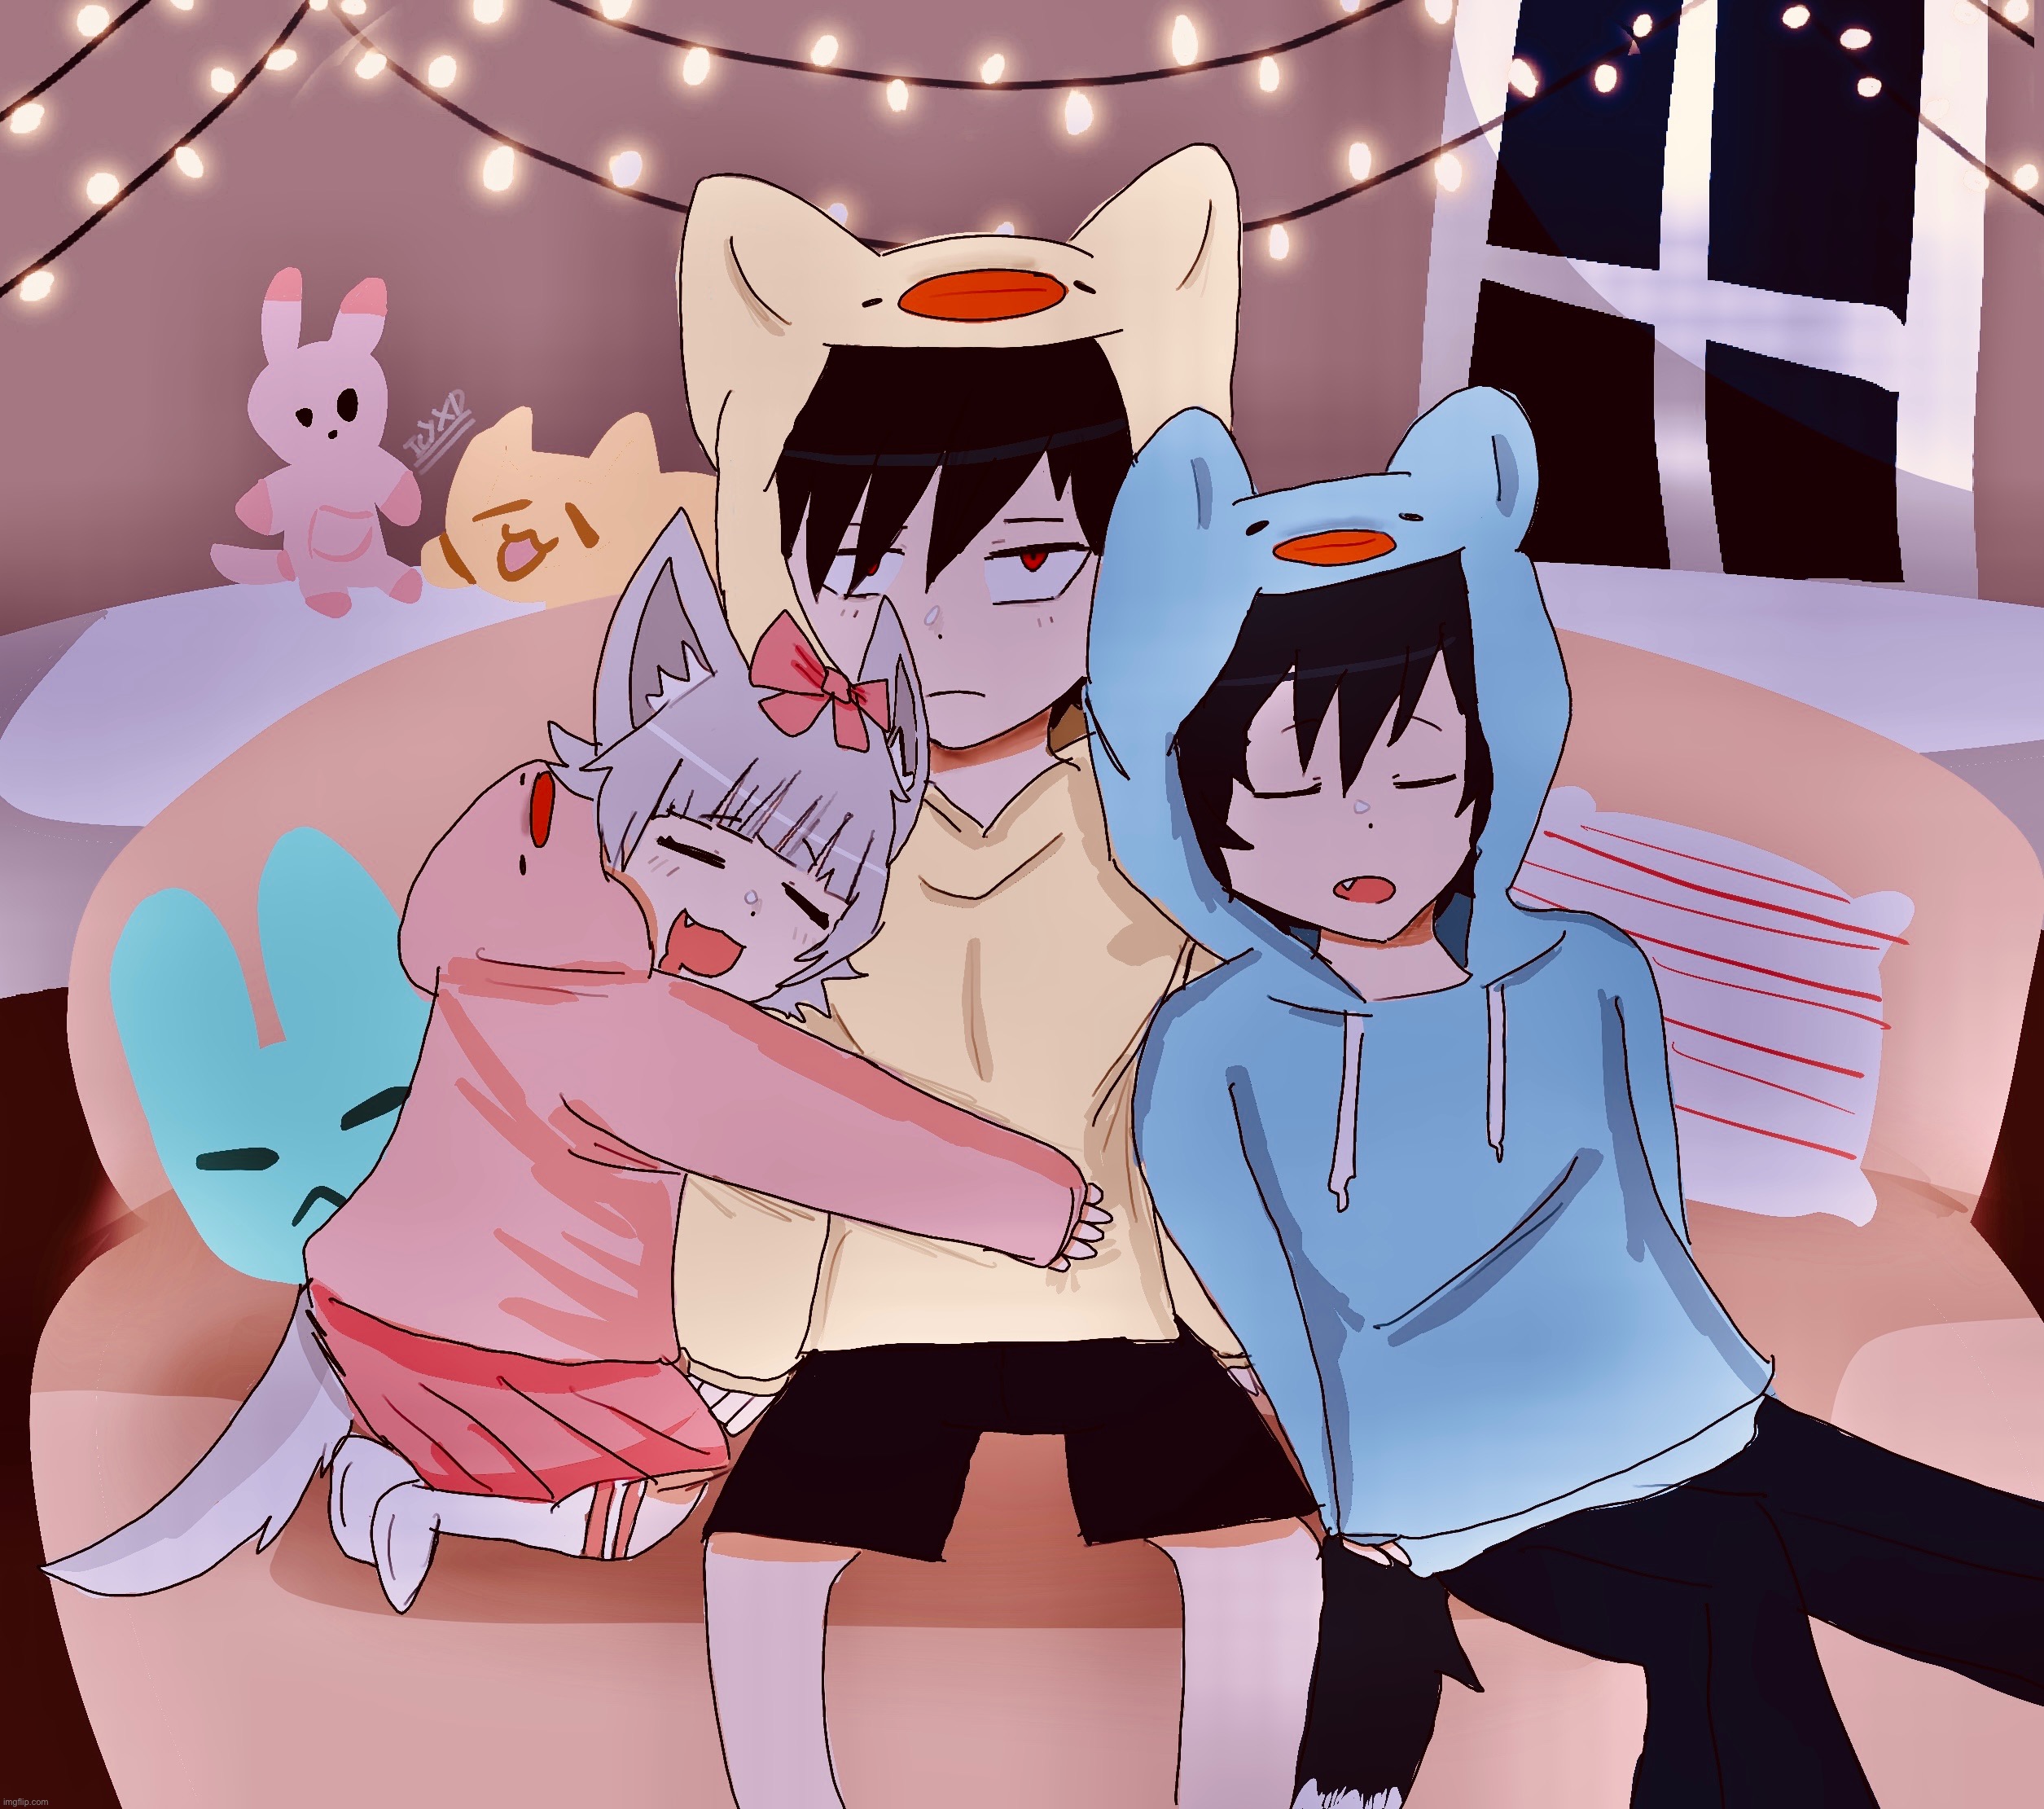 ♡ Shh, the little wolves are sleeping~♡ | image tagged in cuddle,cute,anime,mokumoku,night | made w/ Imgflip meme maker